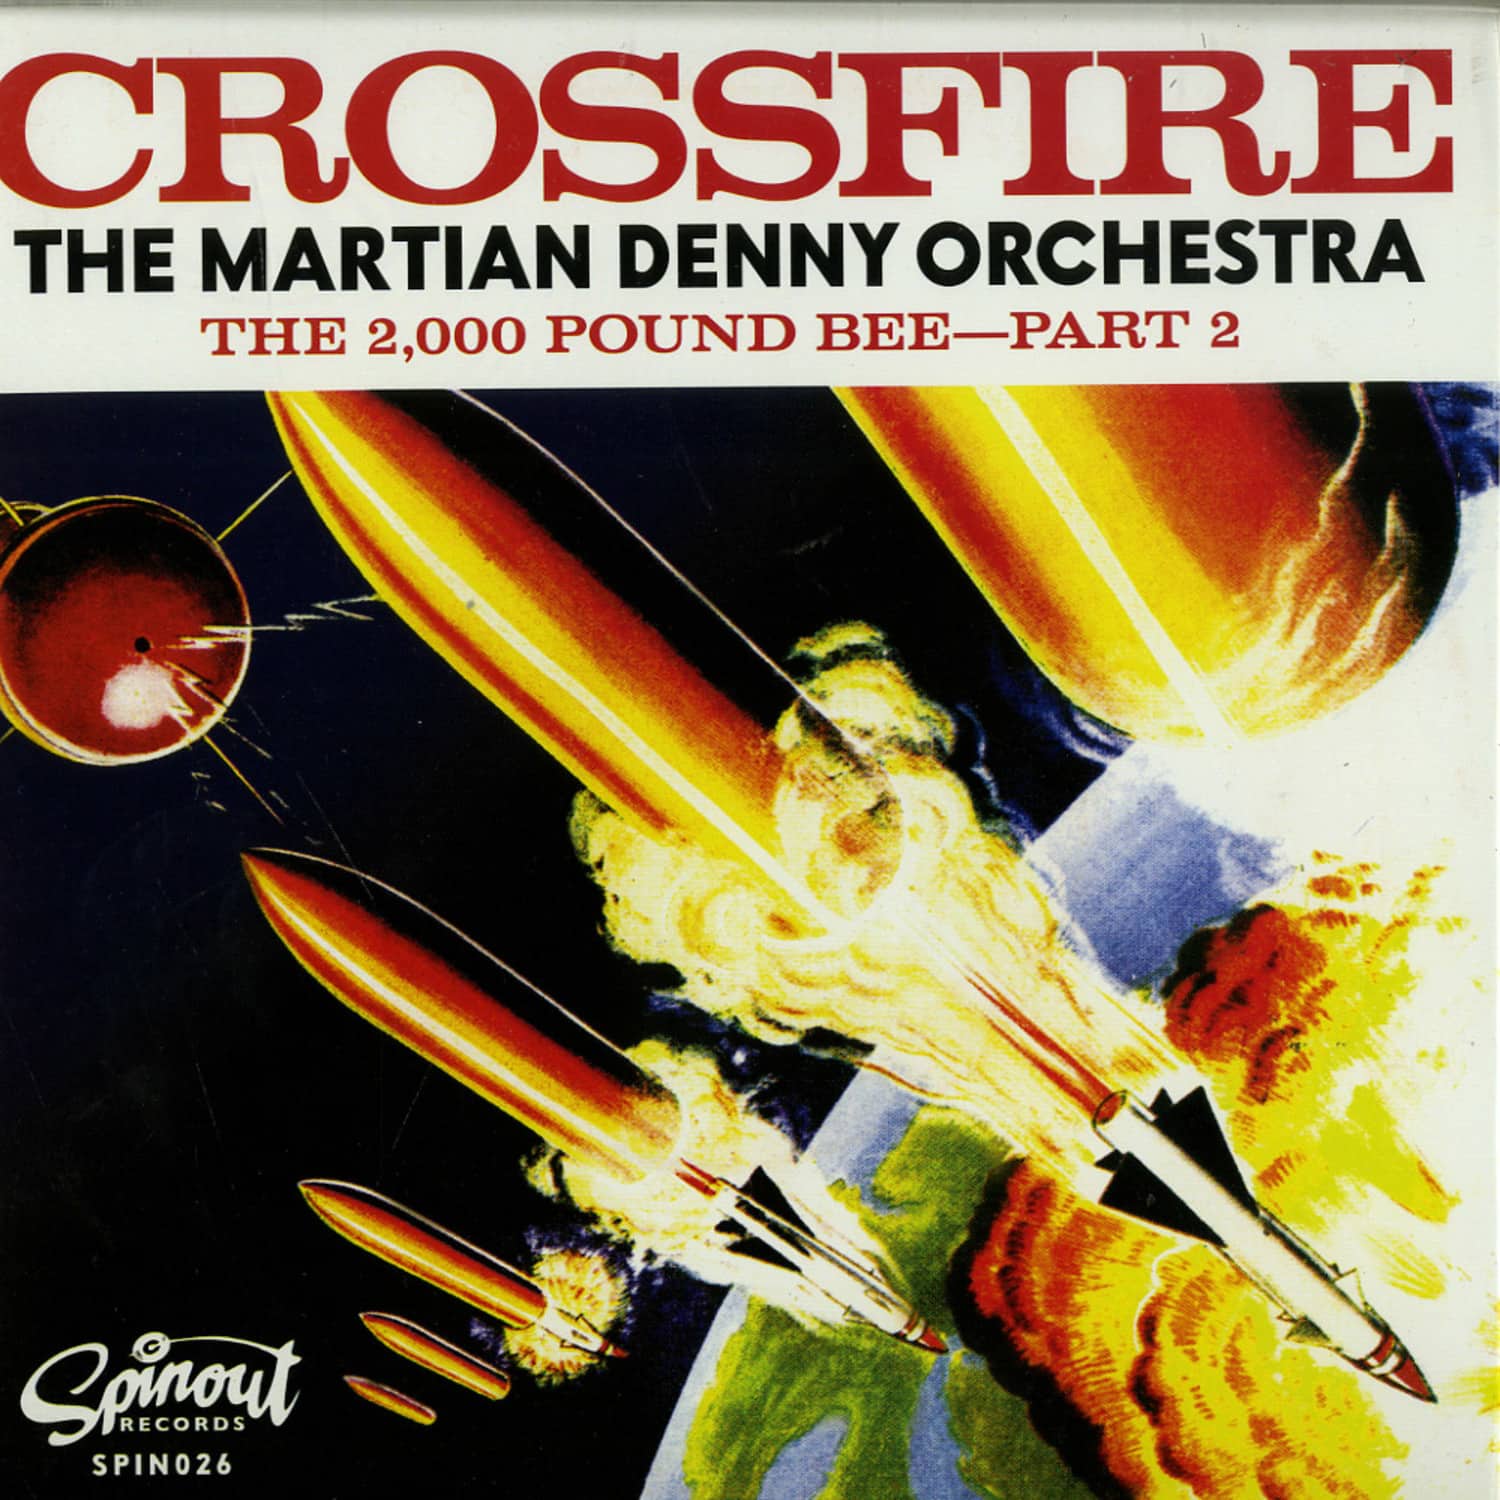 The Martian Denny Orchestra - CROSSFIRE / THE 2000 POUND BEE - PT. 2 